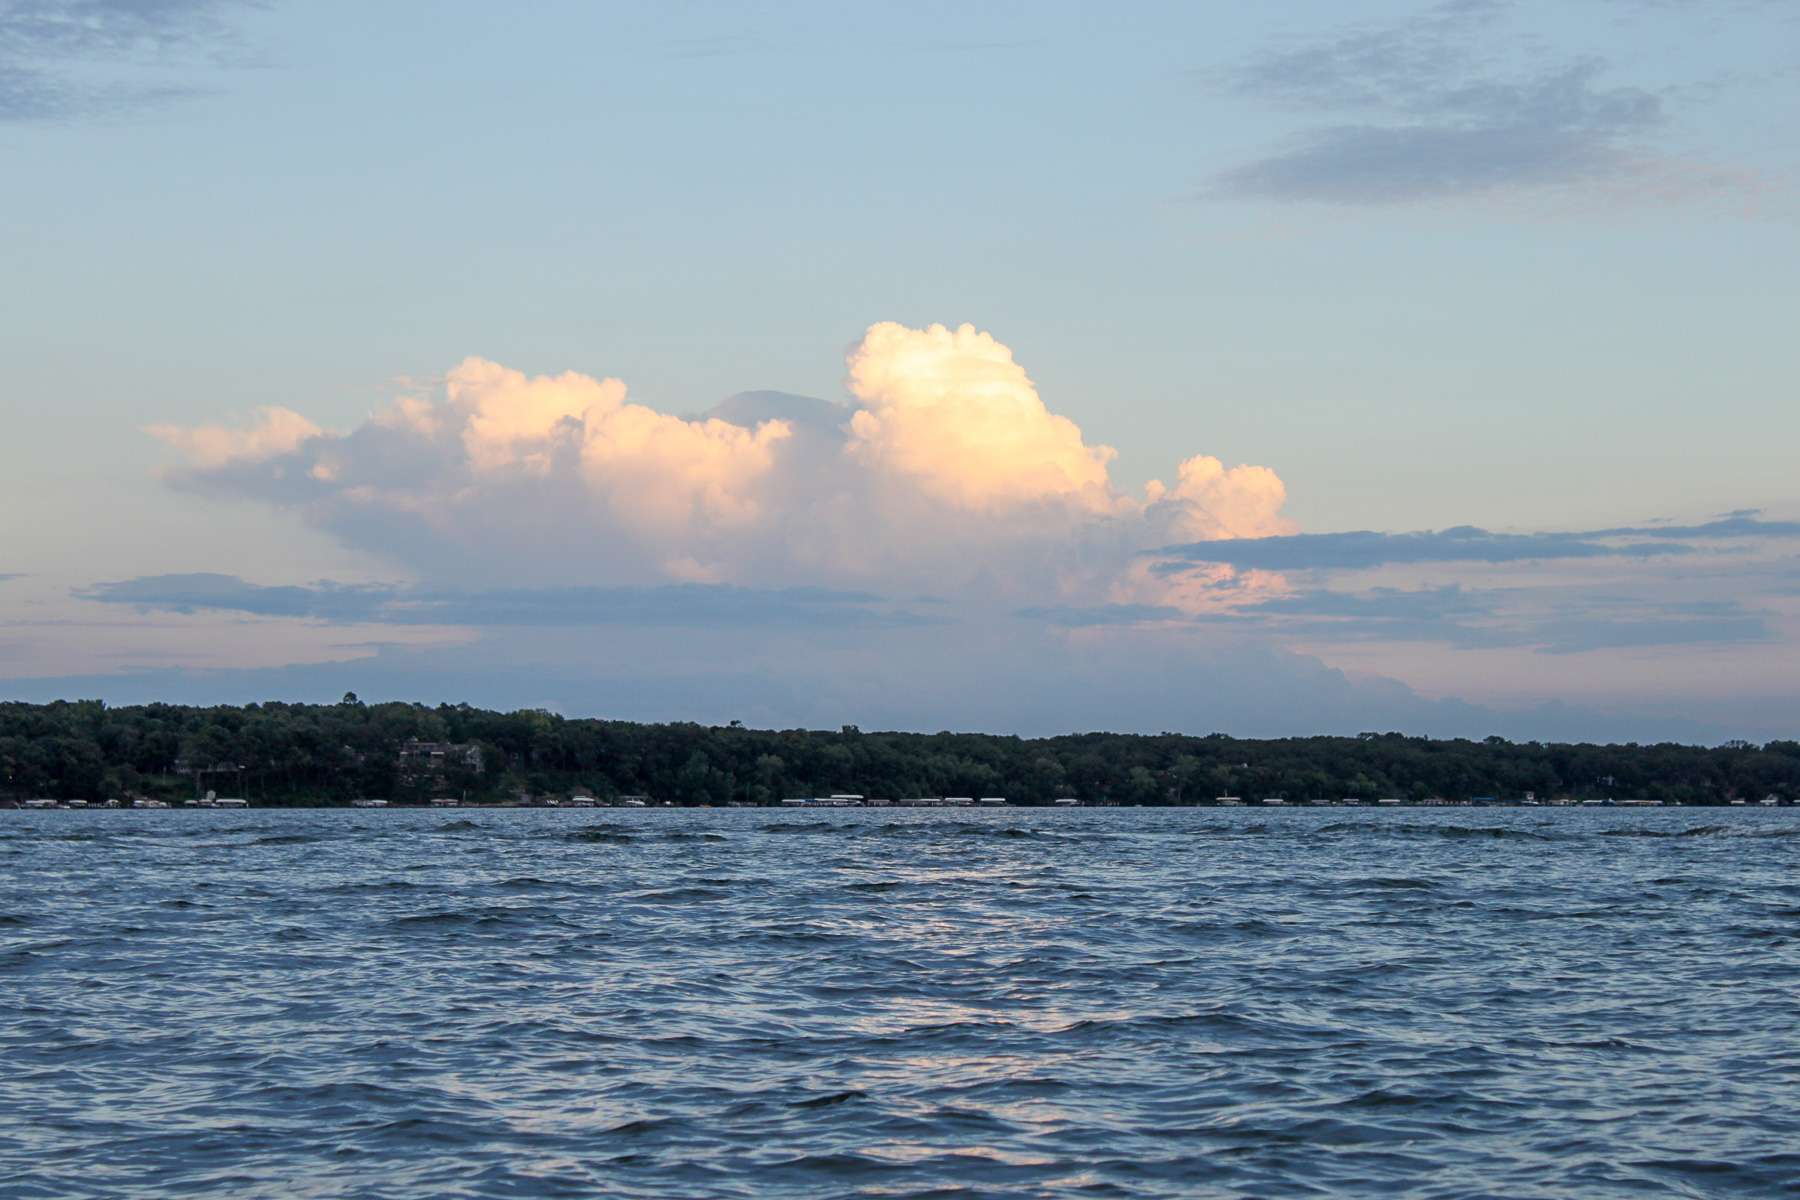 <h4>25. Okoboji Chain of Lakes, Iowa </h4>
[3,847 acres] This little chain of lakes has a healthy population of bass that draws clubs from all over the region. Five-pound averages are possible, as Minnesotaâs Bass Seekers club proved in May 2016 when the winning team put together a 22.8-pound stringer. Second place was just shy of 20 pounds, and third topped 18 pounds. Big bass was 6.41 pounds, and 75 percent of the field brought five fish to the scales.
